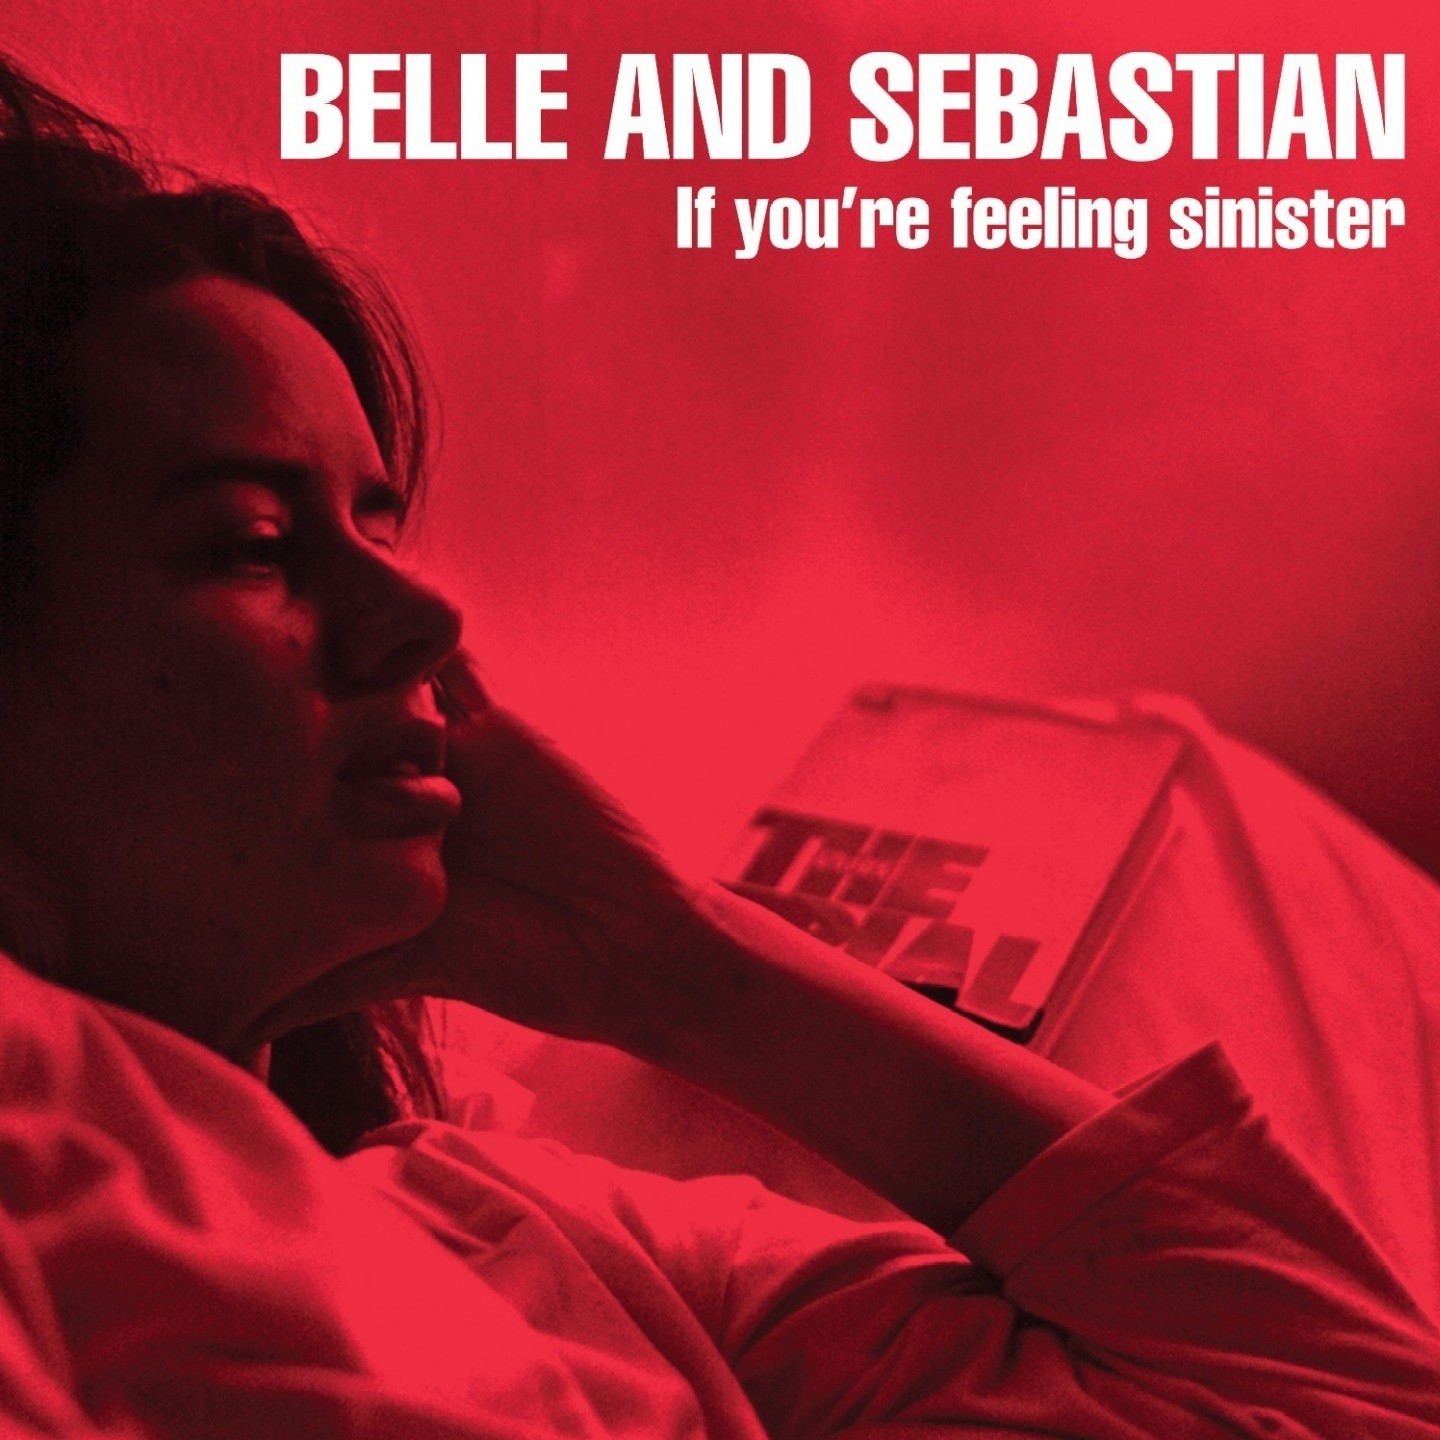 Ranked: Belle and Sebastian's Greatest Albums